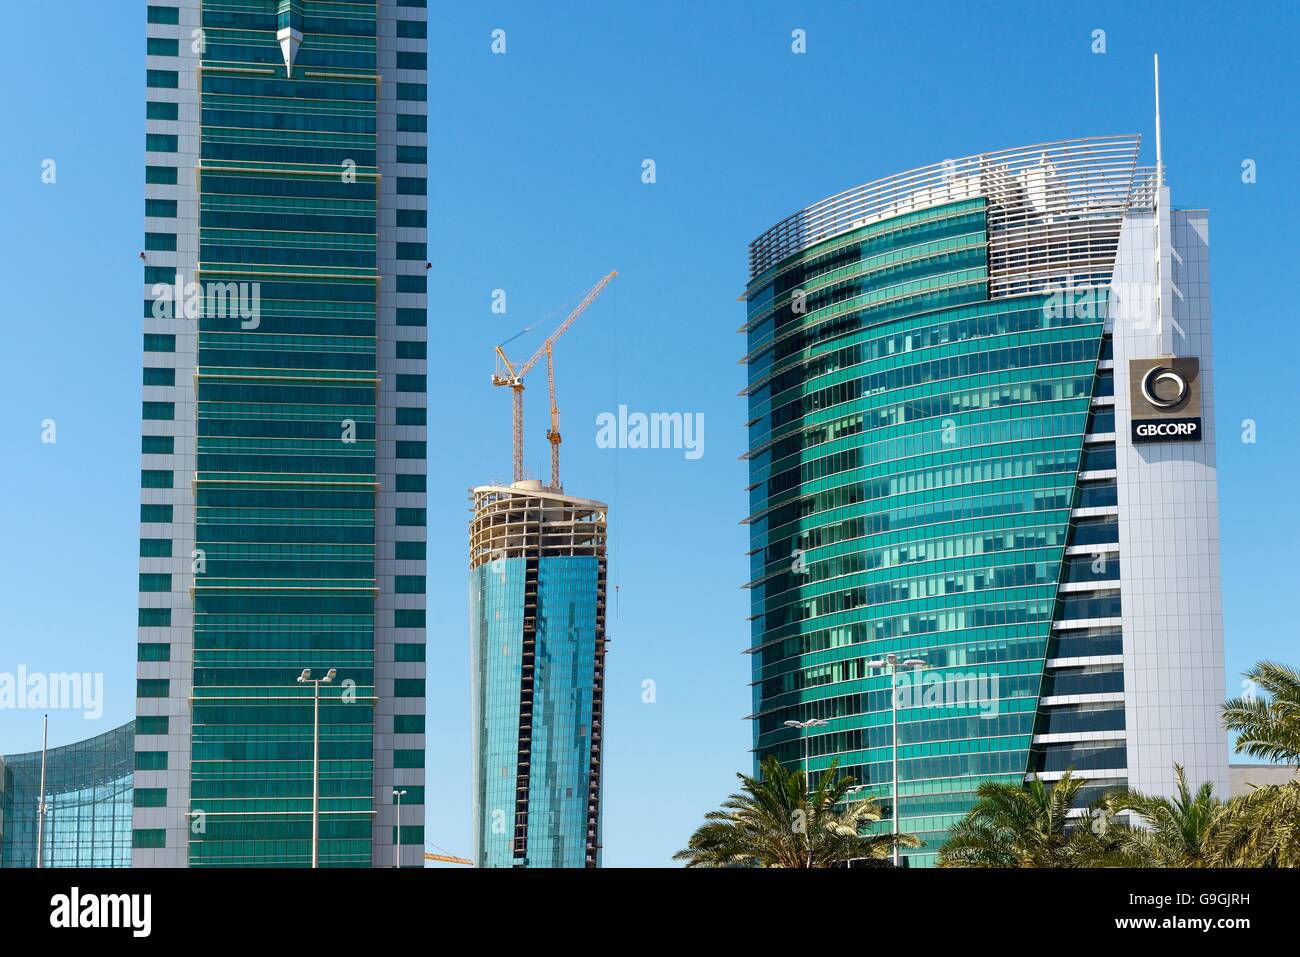 Bahrain Financial Harbour BFH development in Manama, the modern capital of Bahrain. Commercial East tower left and GB Corp right Stock Photo